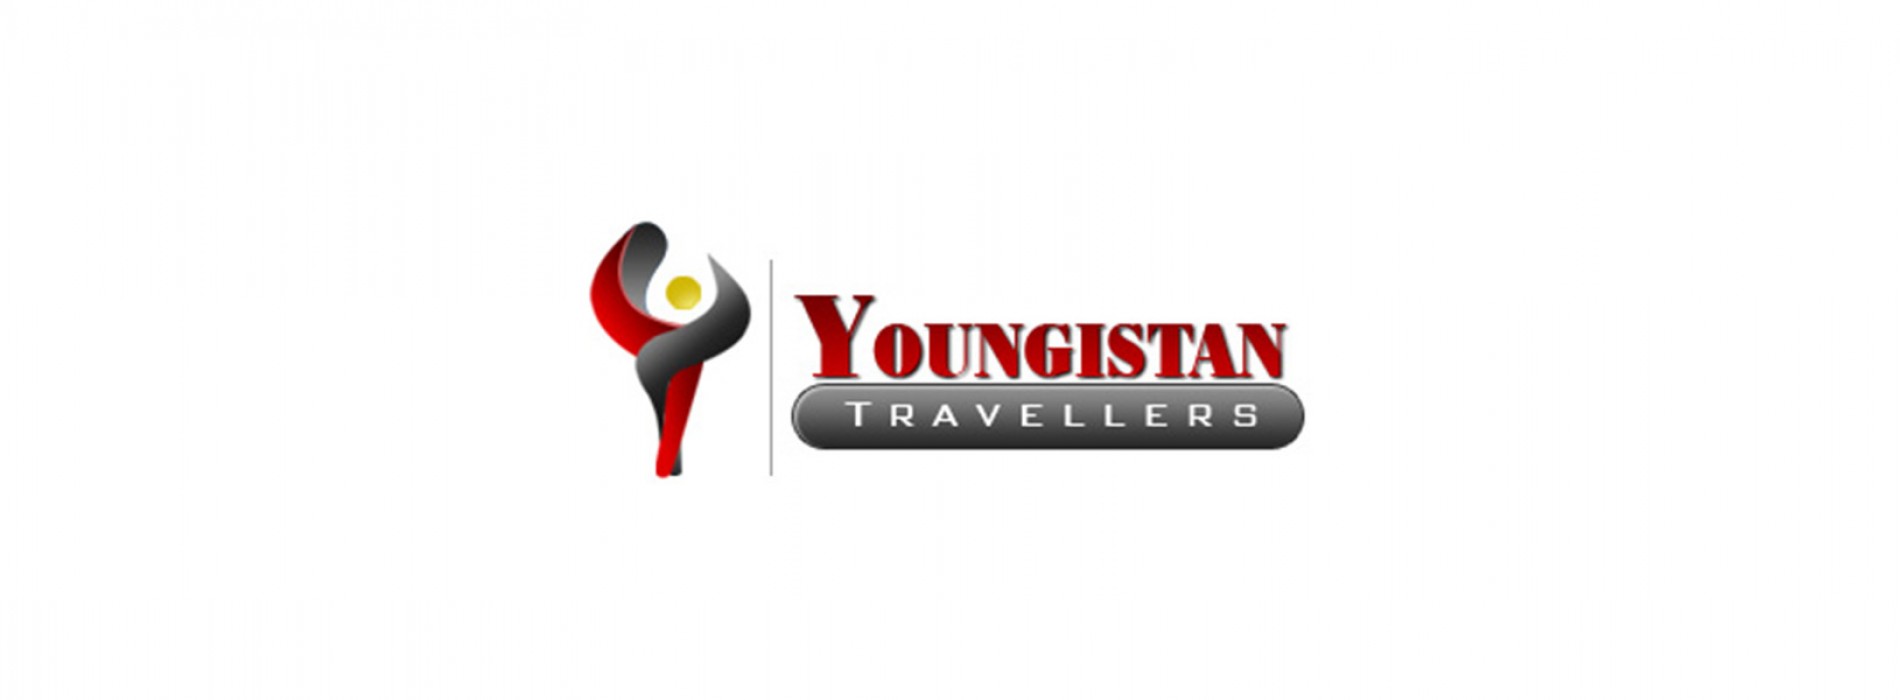 YOUNGISTAN TRAVELLERS ANNOUNCES ENTRY INTO SRI LANKA MARKET